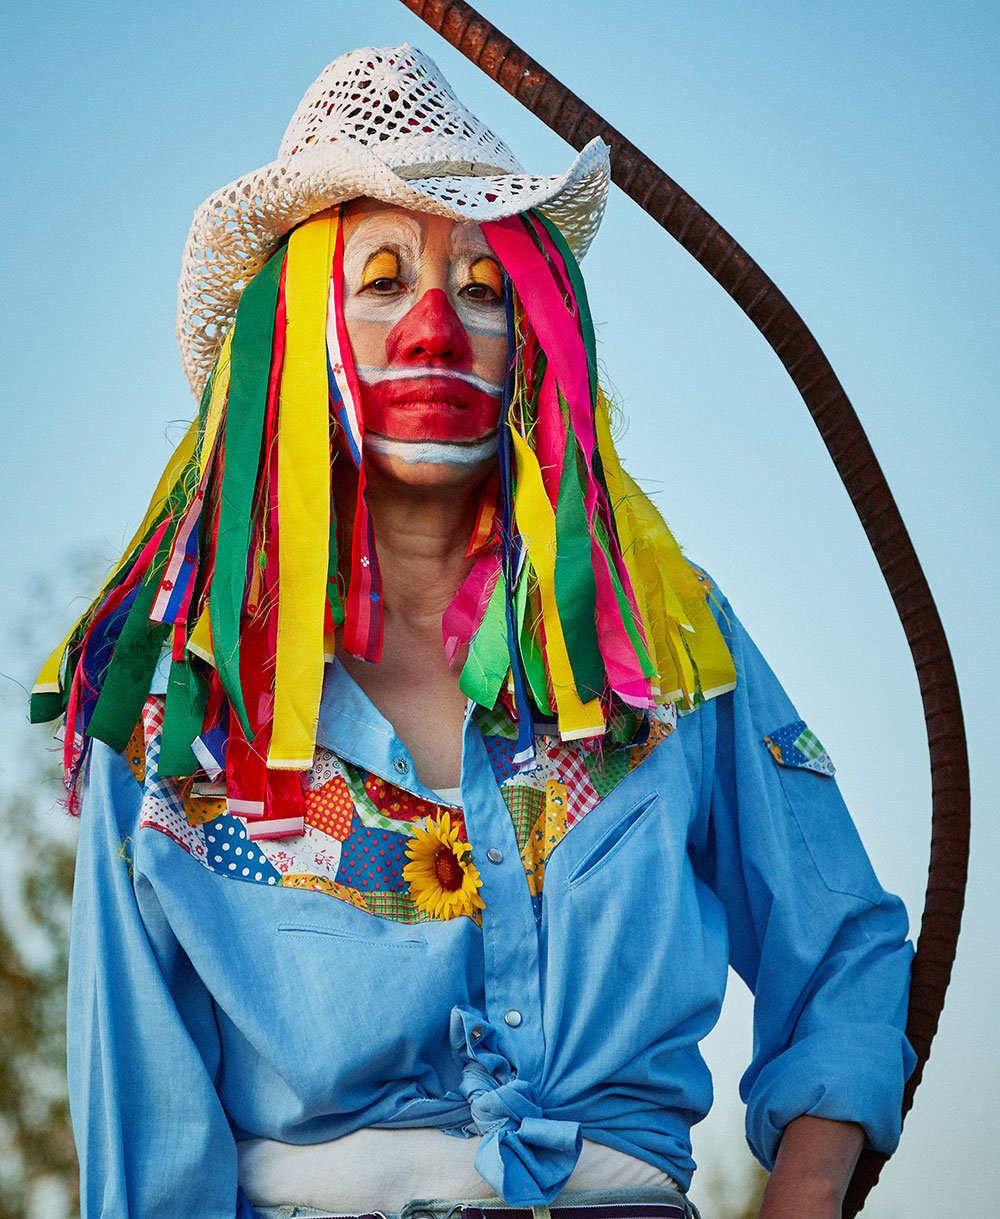 A woman looks directly at the camera. She is shot from the waist up. She is wearing a white straw hat, bright red, yellow and white clown makeup, and a wig made of long strips of yellow, fuchsia, blue and red fabric. She is wearing a light blue cowboy shirt with a rainbow patchwork quilt pattern across her chest. 